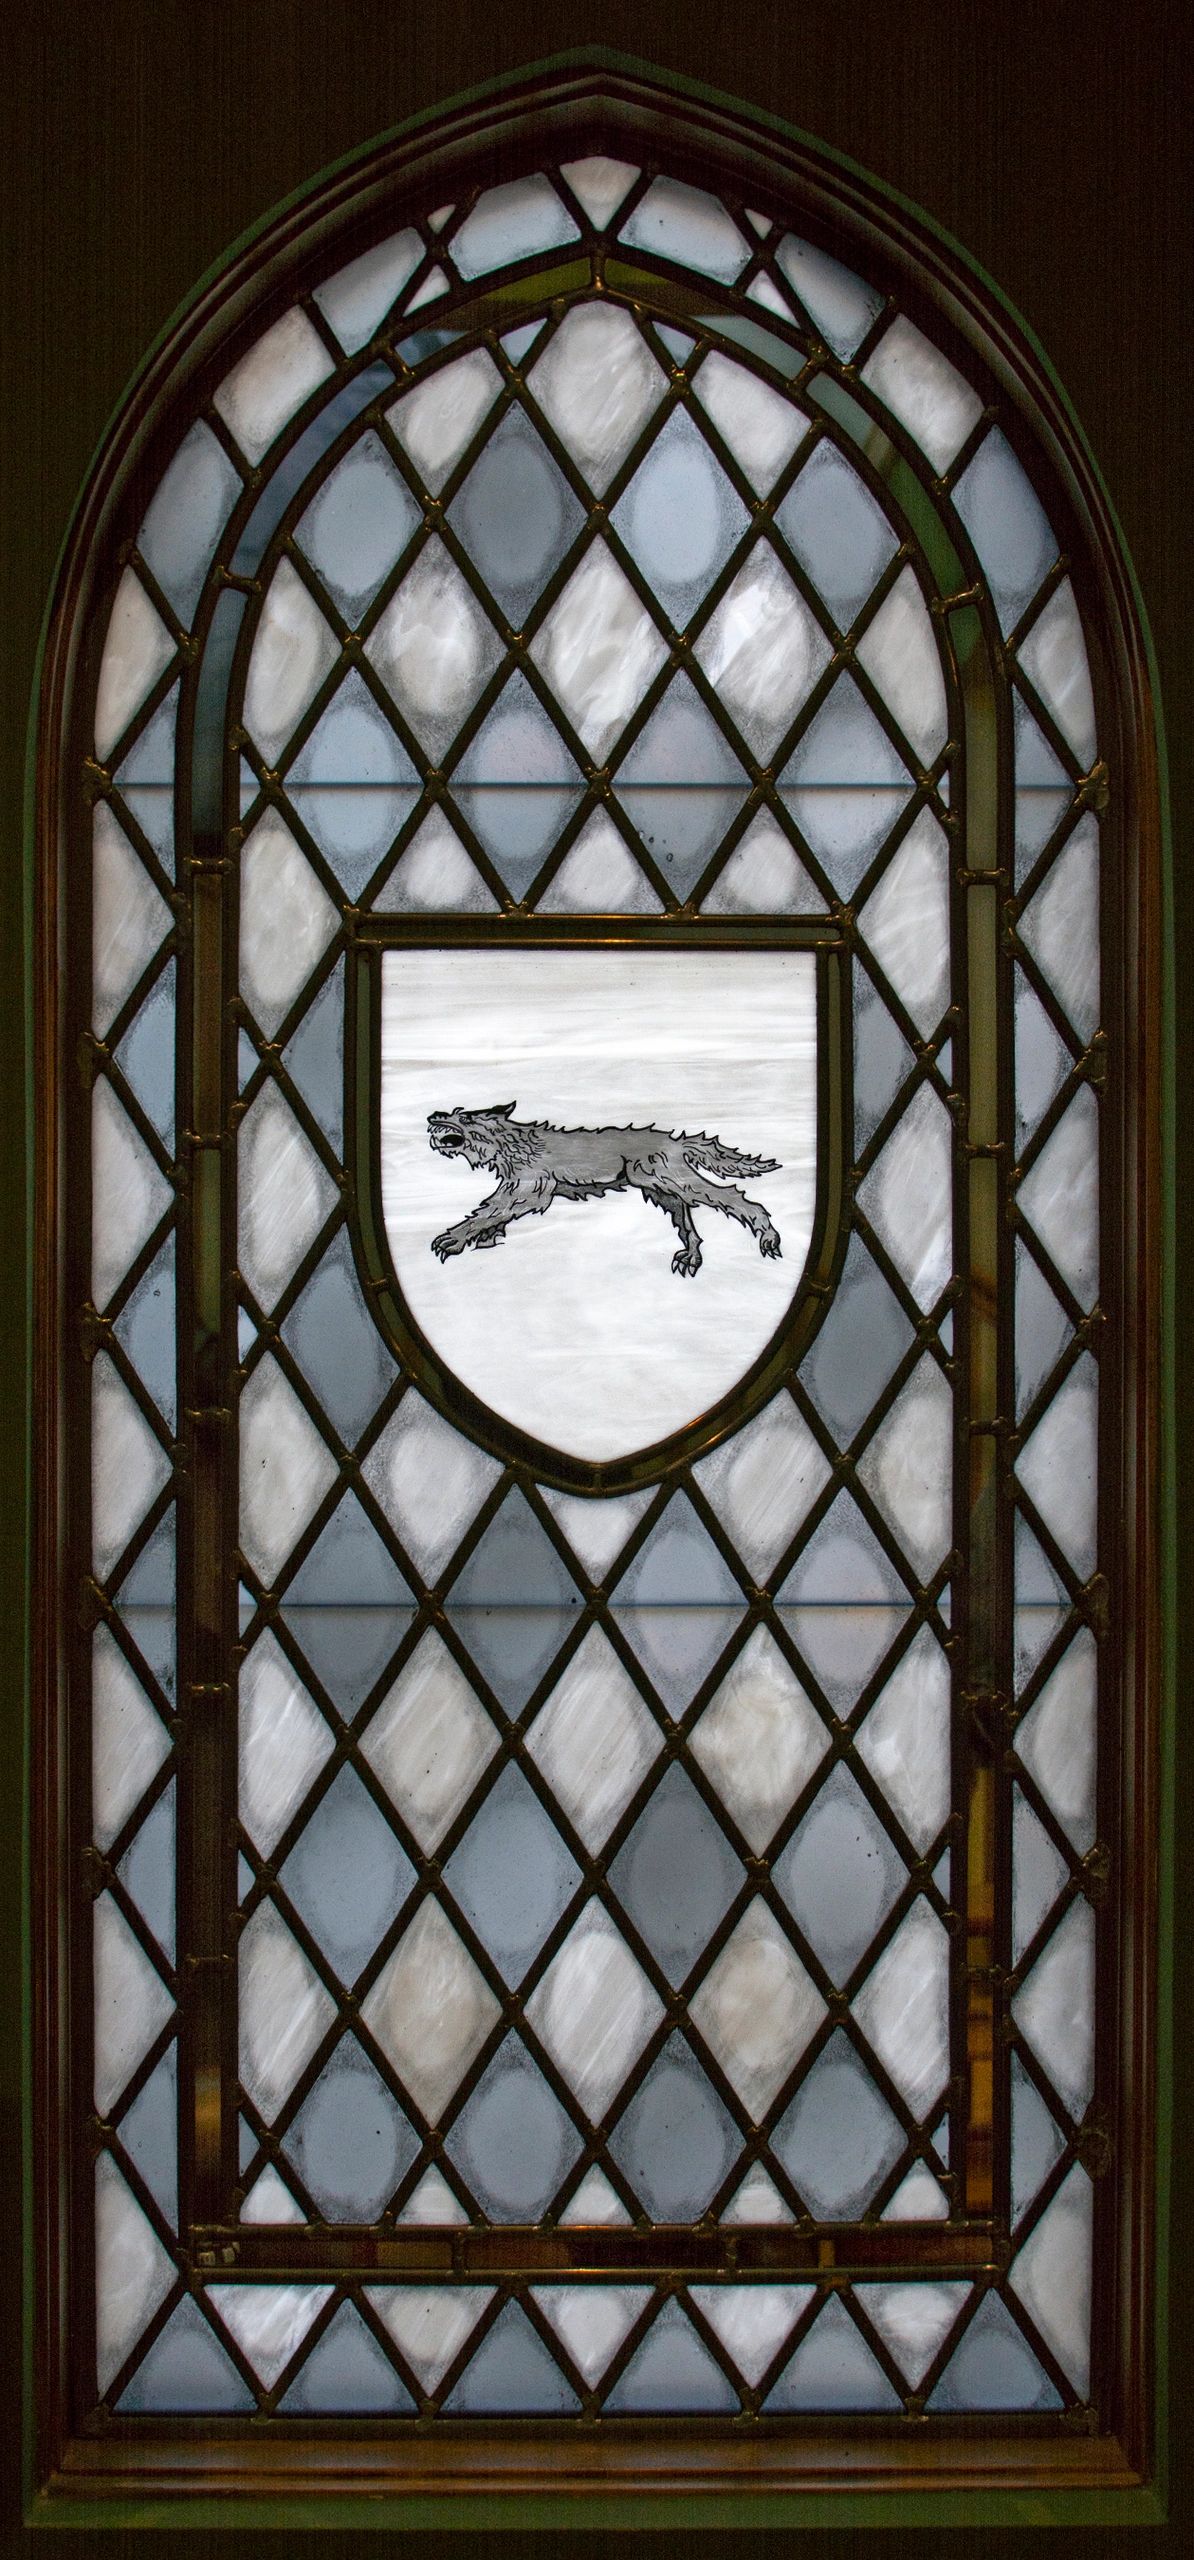 Dire wolf running across a field of snow in center of sigil